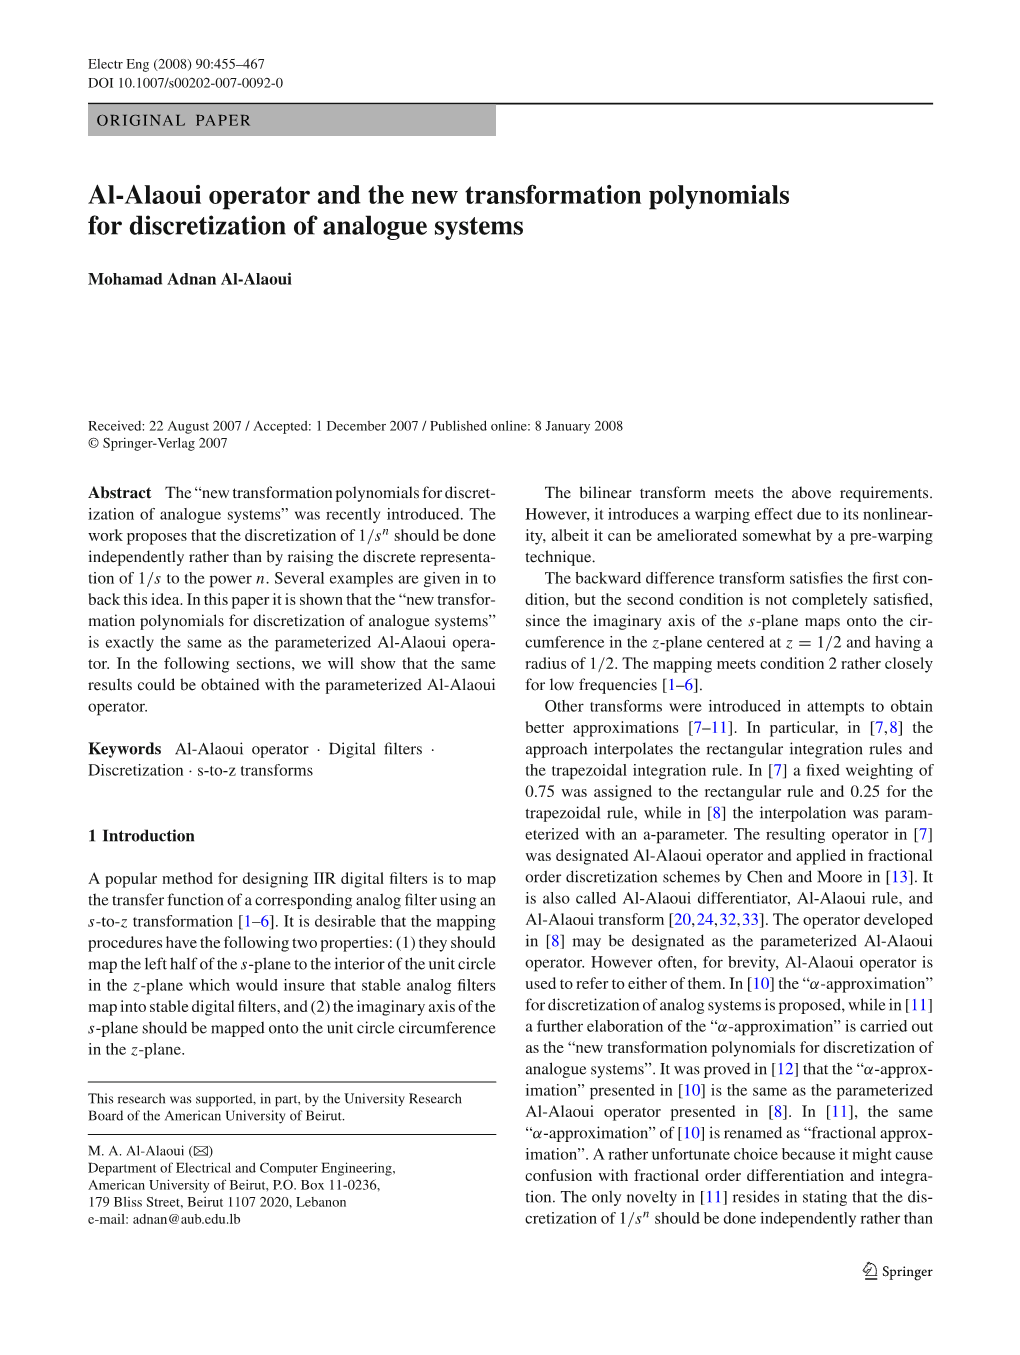 Al-Alaoui Operator and the New Transformation Polynomials for Discretization of Analogue Systems